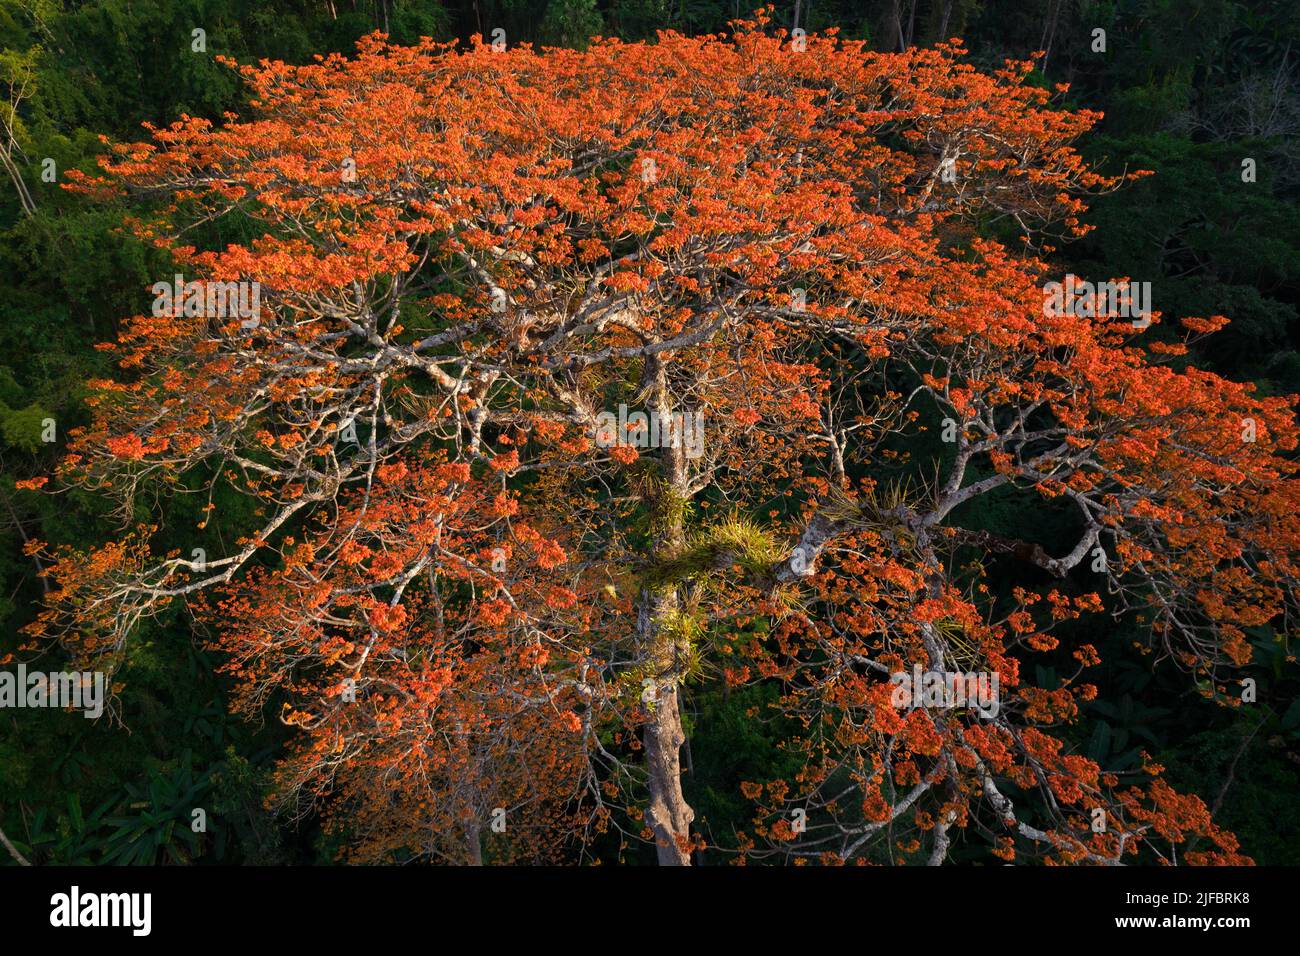 Aerial view of a large Pterocymbium macranthum tree in full blossom, Chiang dao rainforest, Thailand Stock Photo